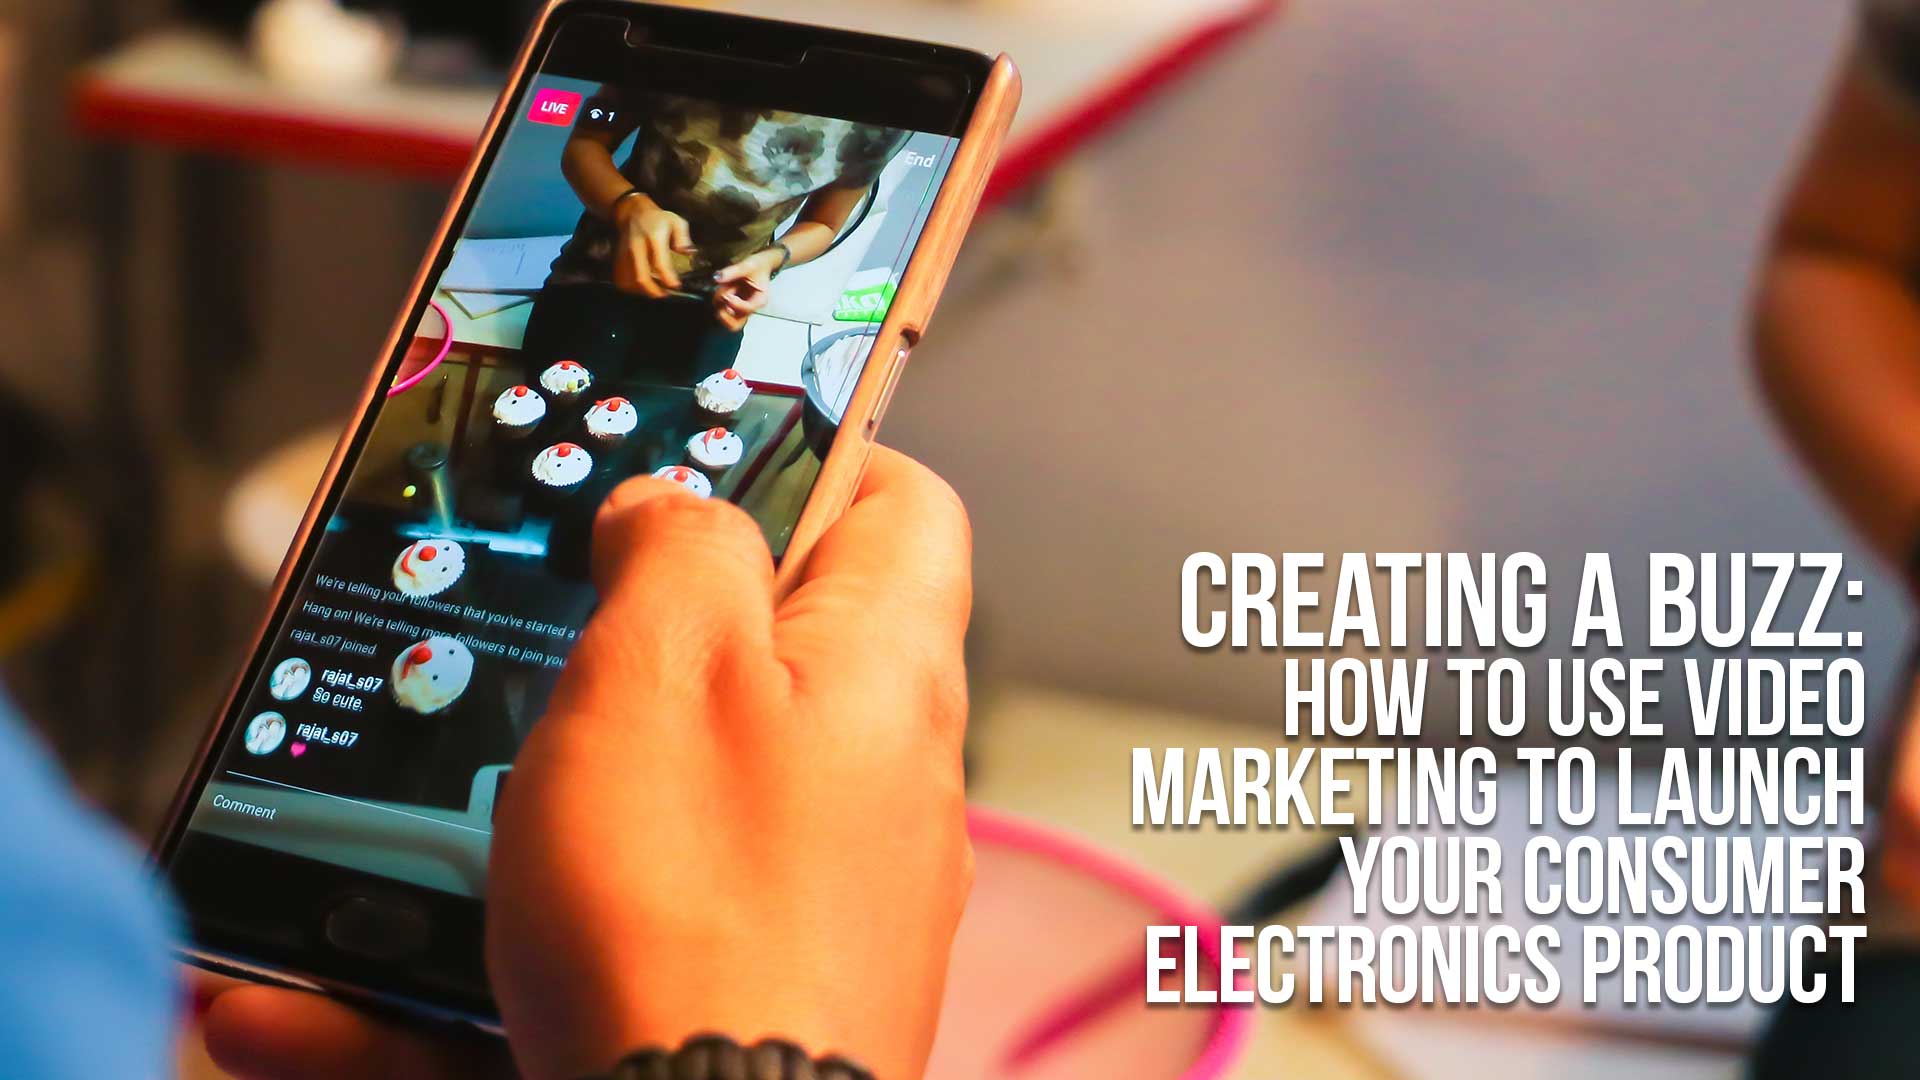 How to Use Video Marketing to Launch Your Consumer Electronics Product